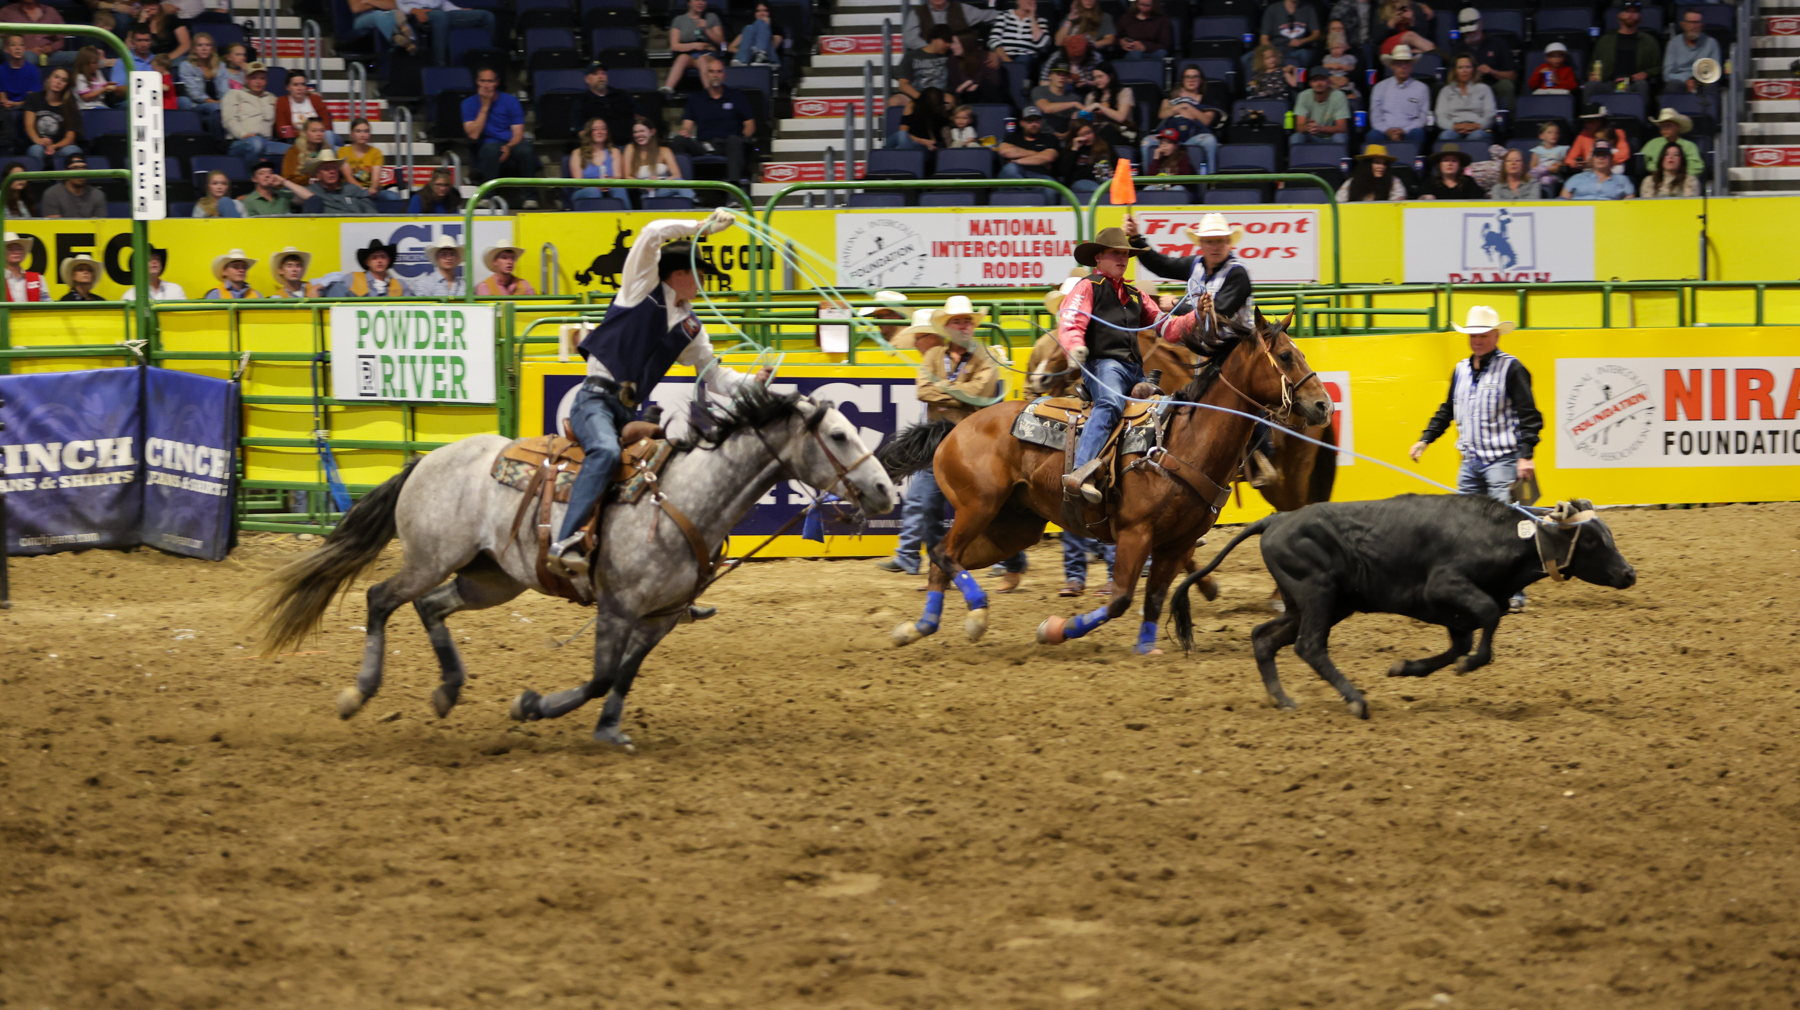 Coyotes continue CNFR streak with strong performances